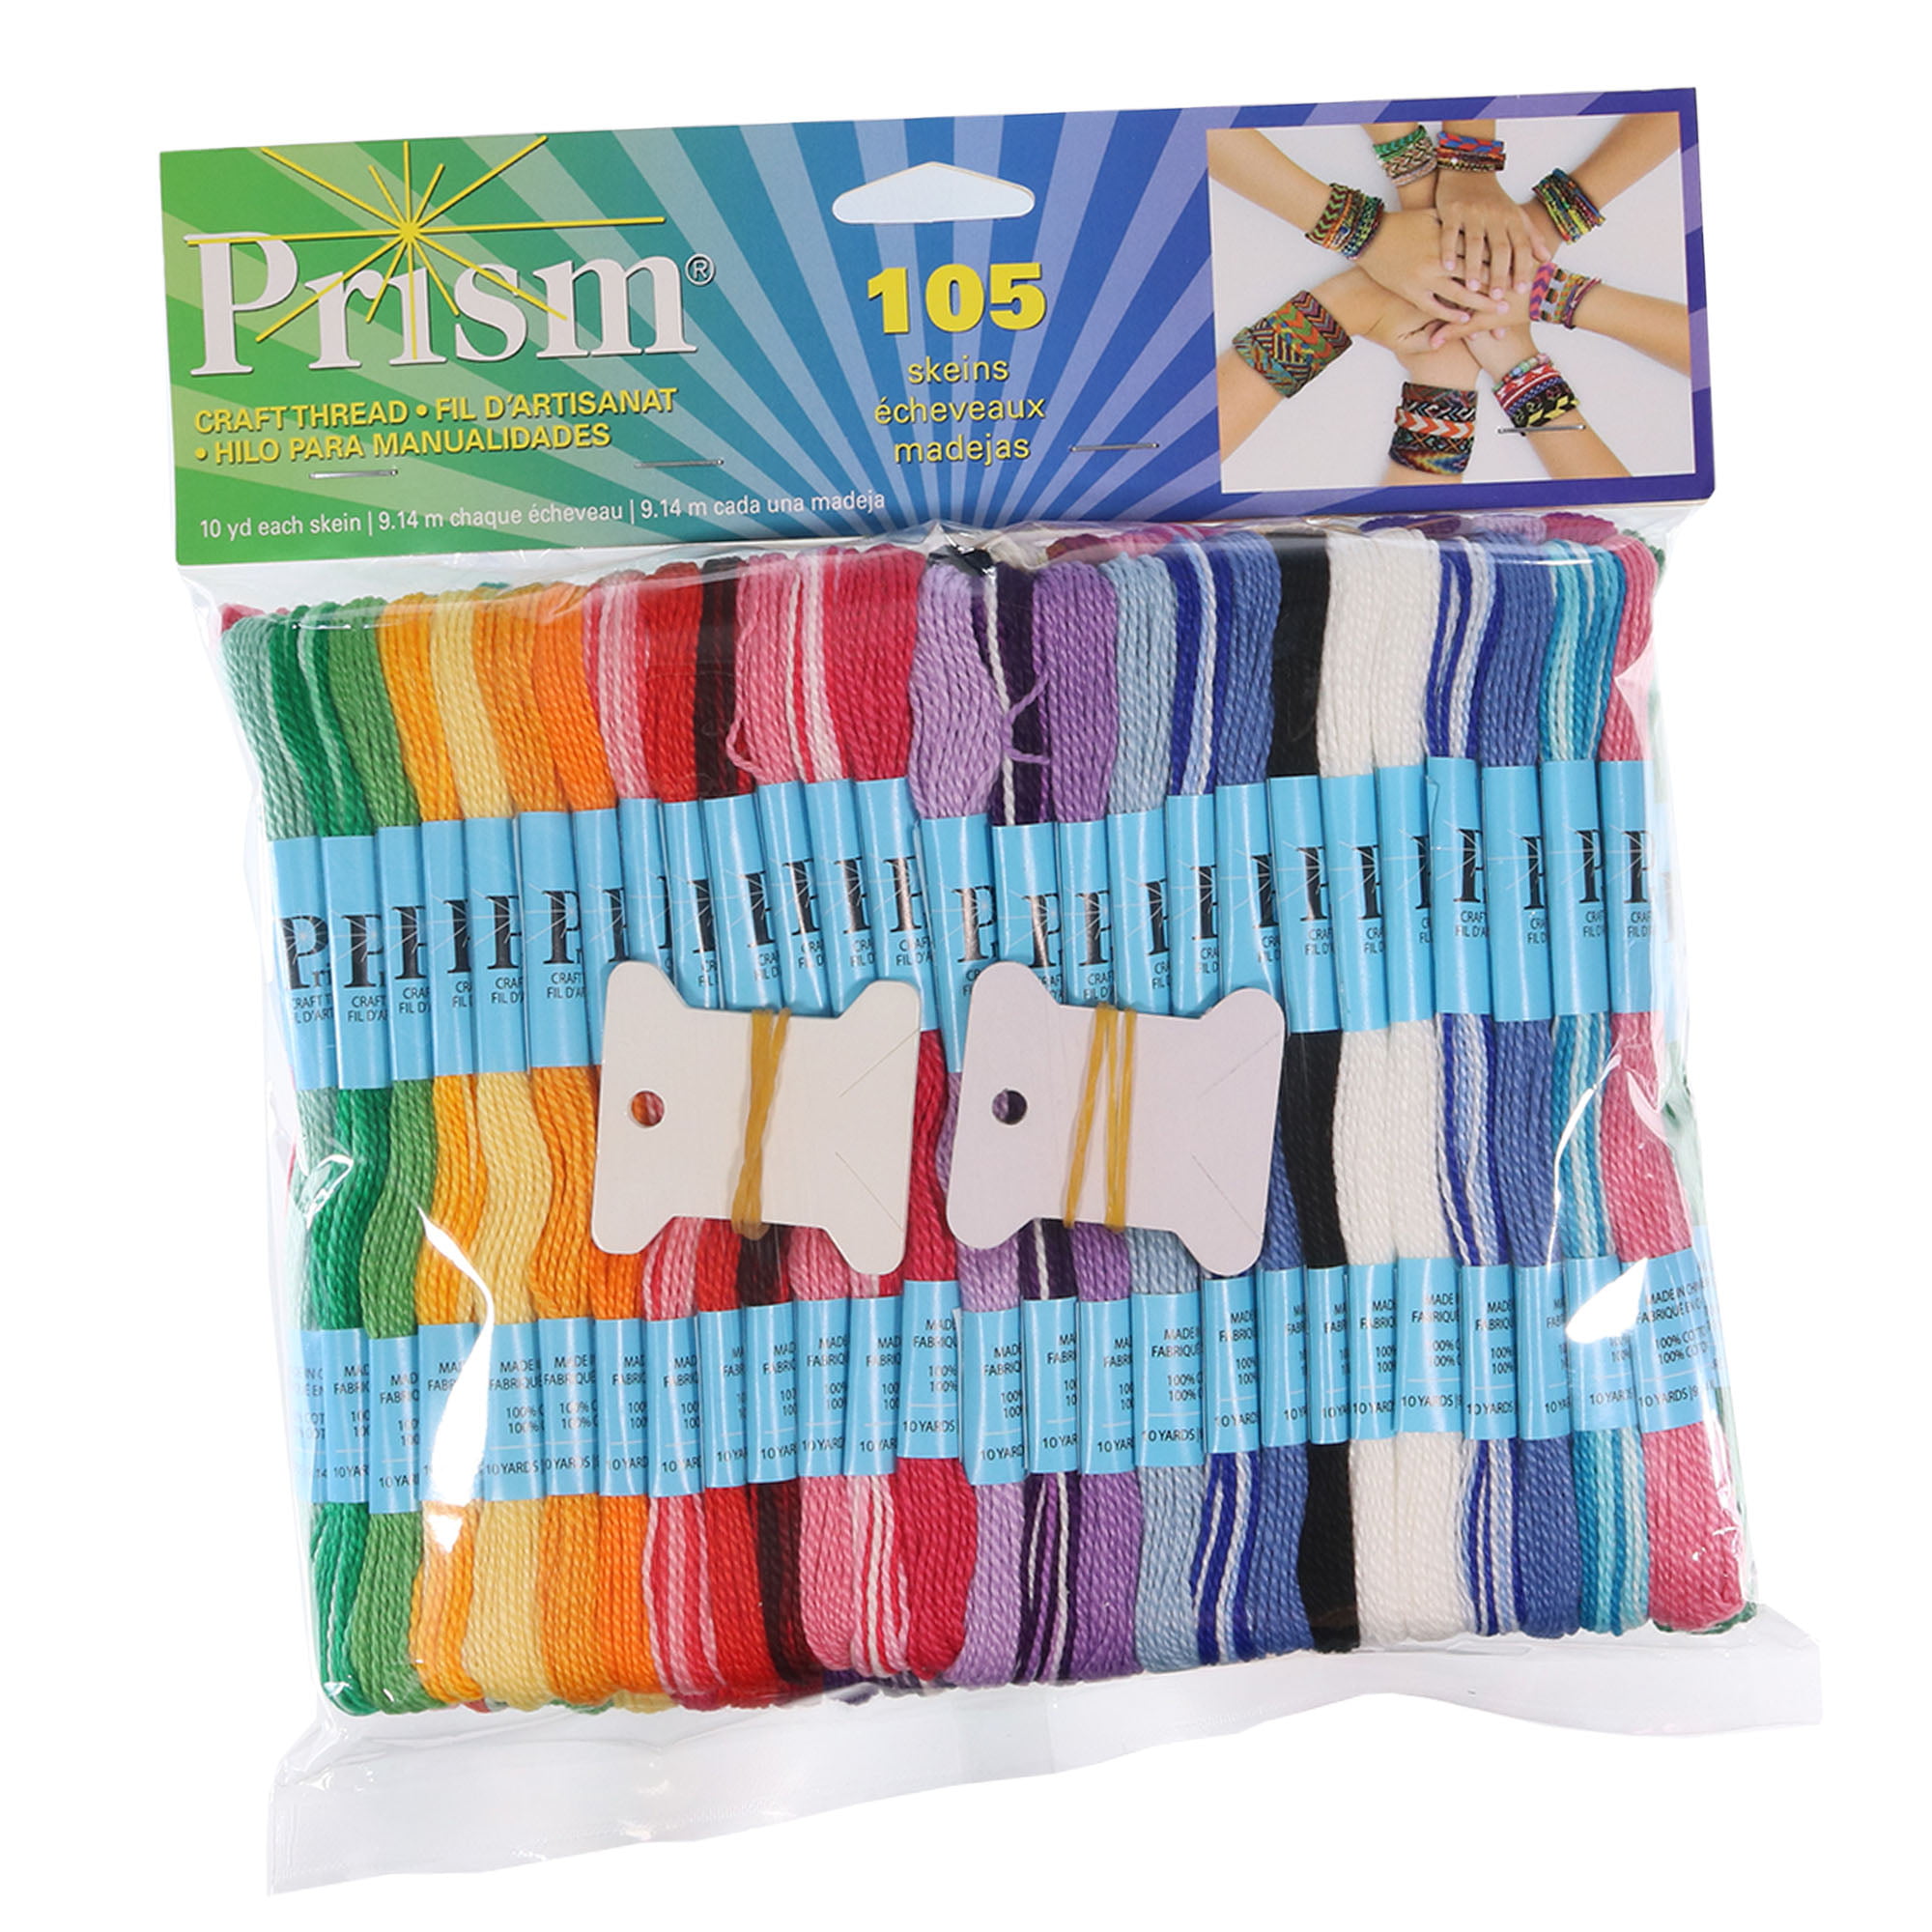 Prism Craft Thread – Embroidery and Cross Stitch Floss – Jumbo Pack of 105  Skeins – 10 Yards per Skein 